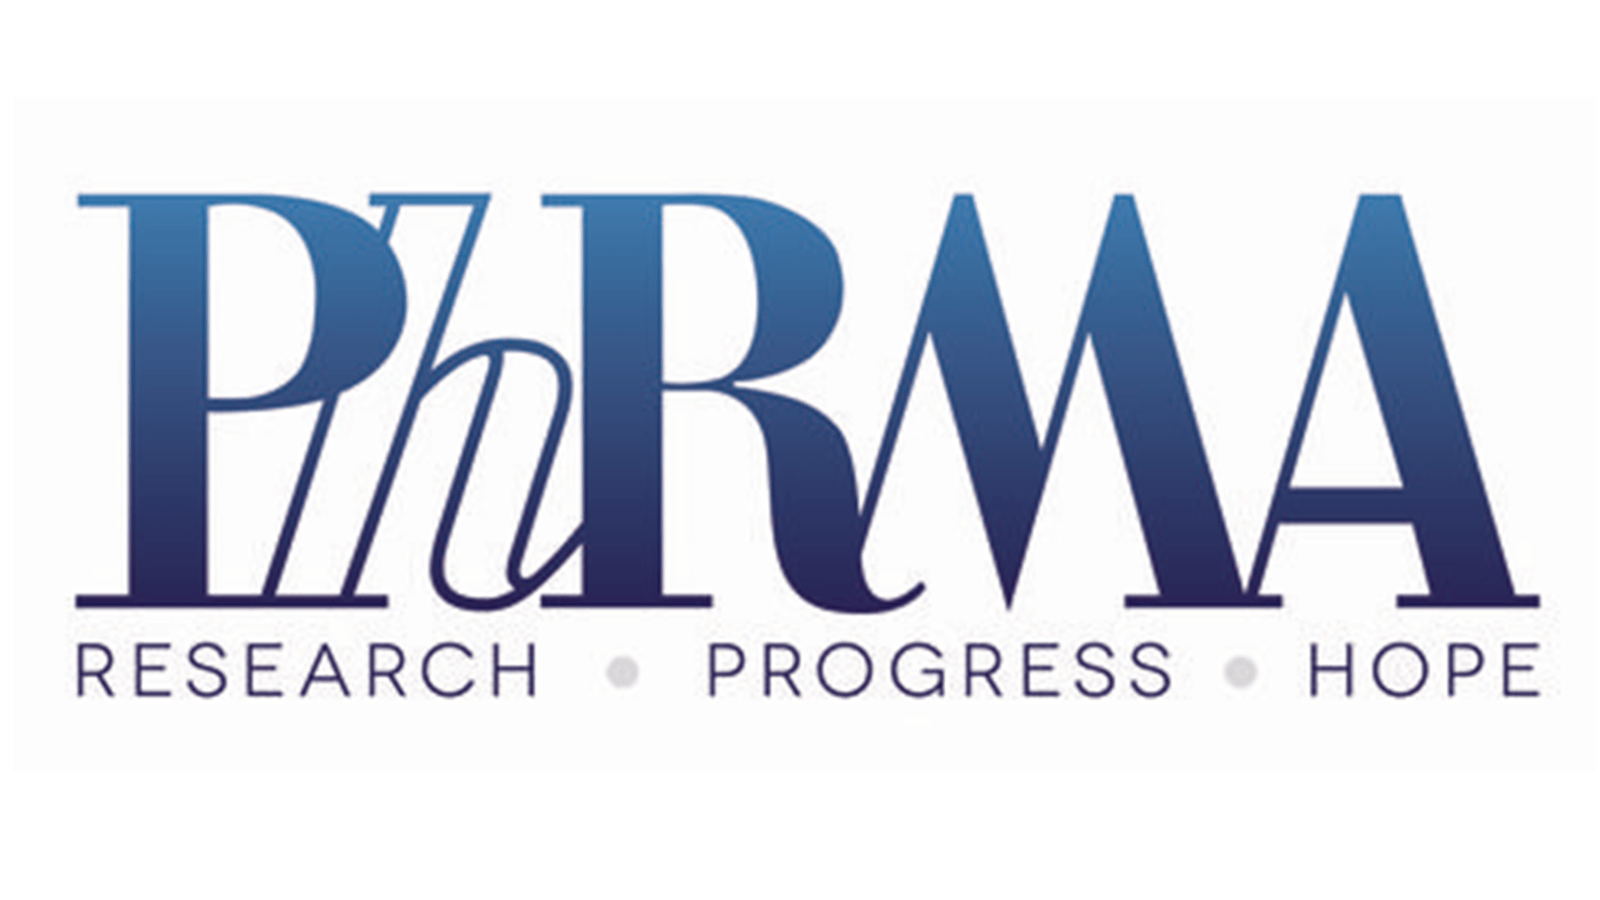 PhRMA Logo for the Pharmaceutical Research and Manufacturers of America